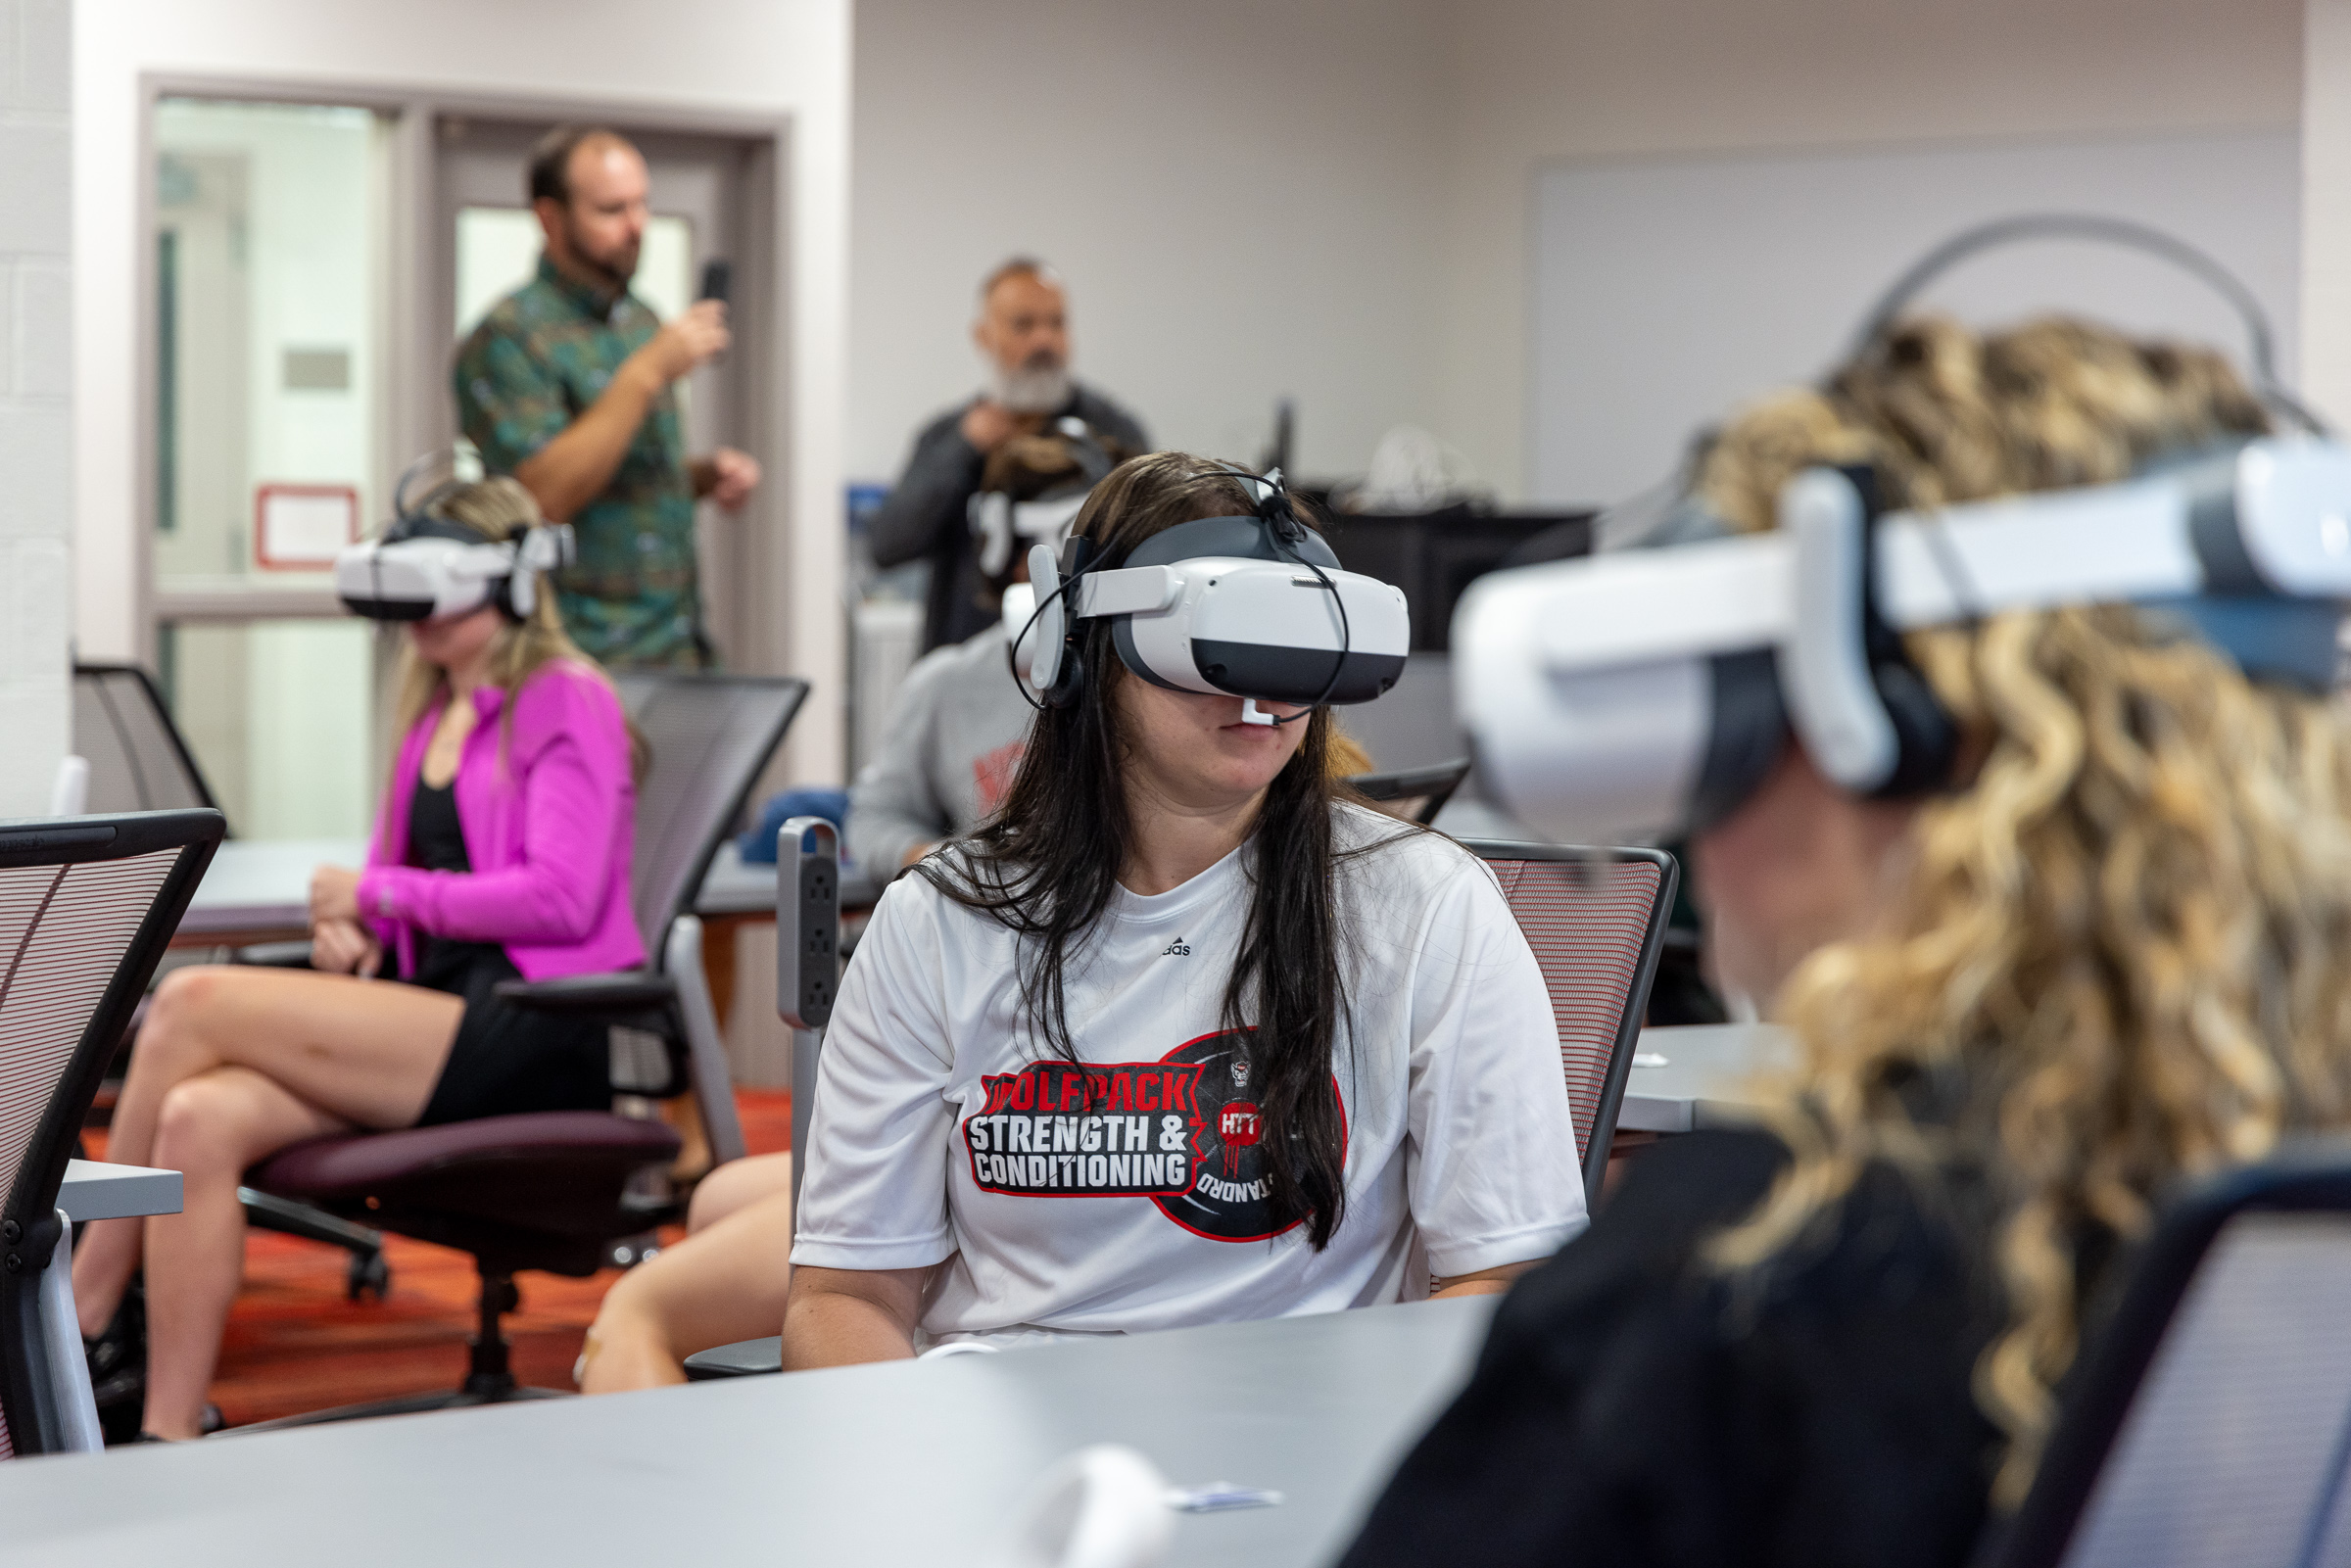 A white student with long brown hair uses a virtual reality headset while sitting at a desk in a classroom.